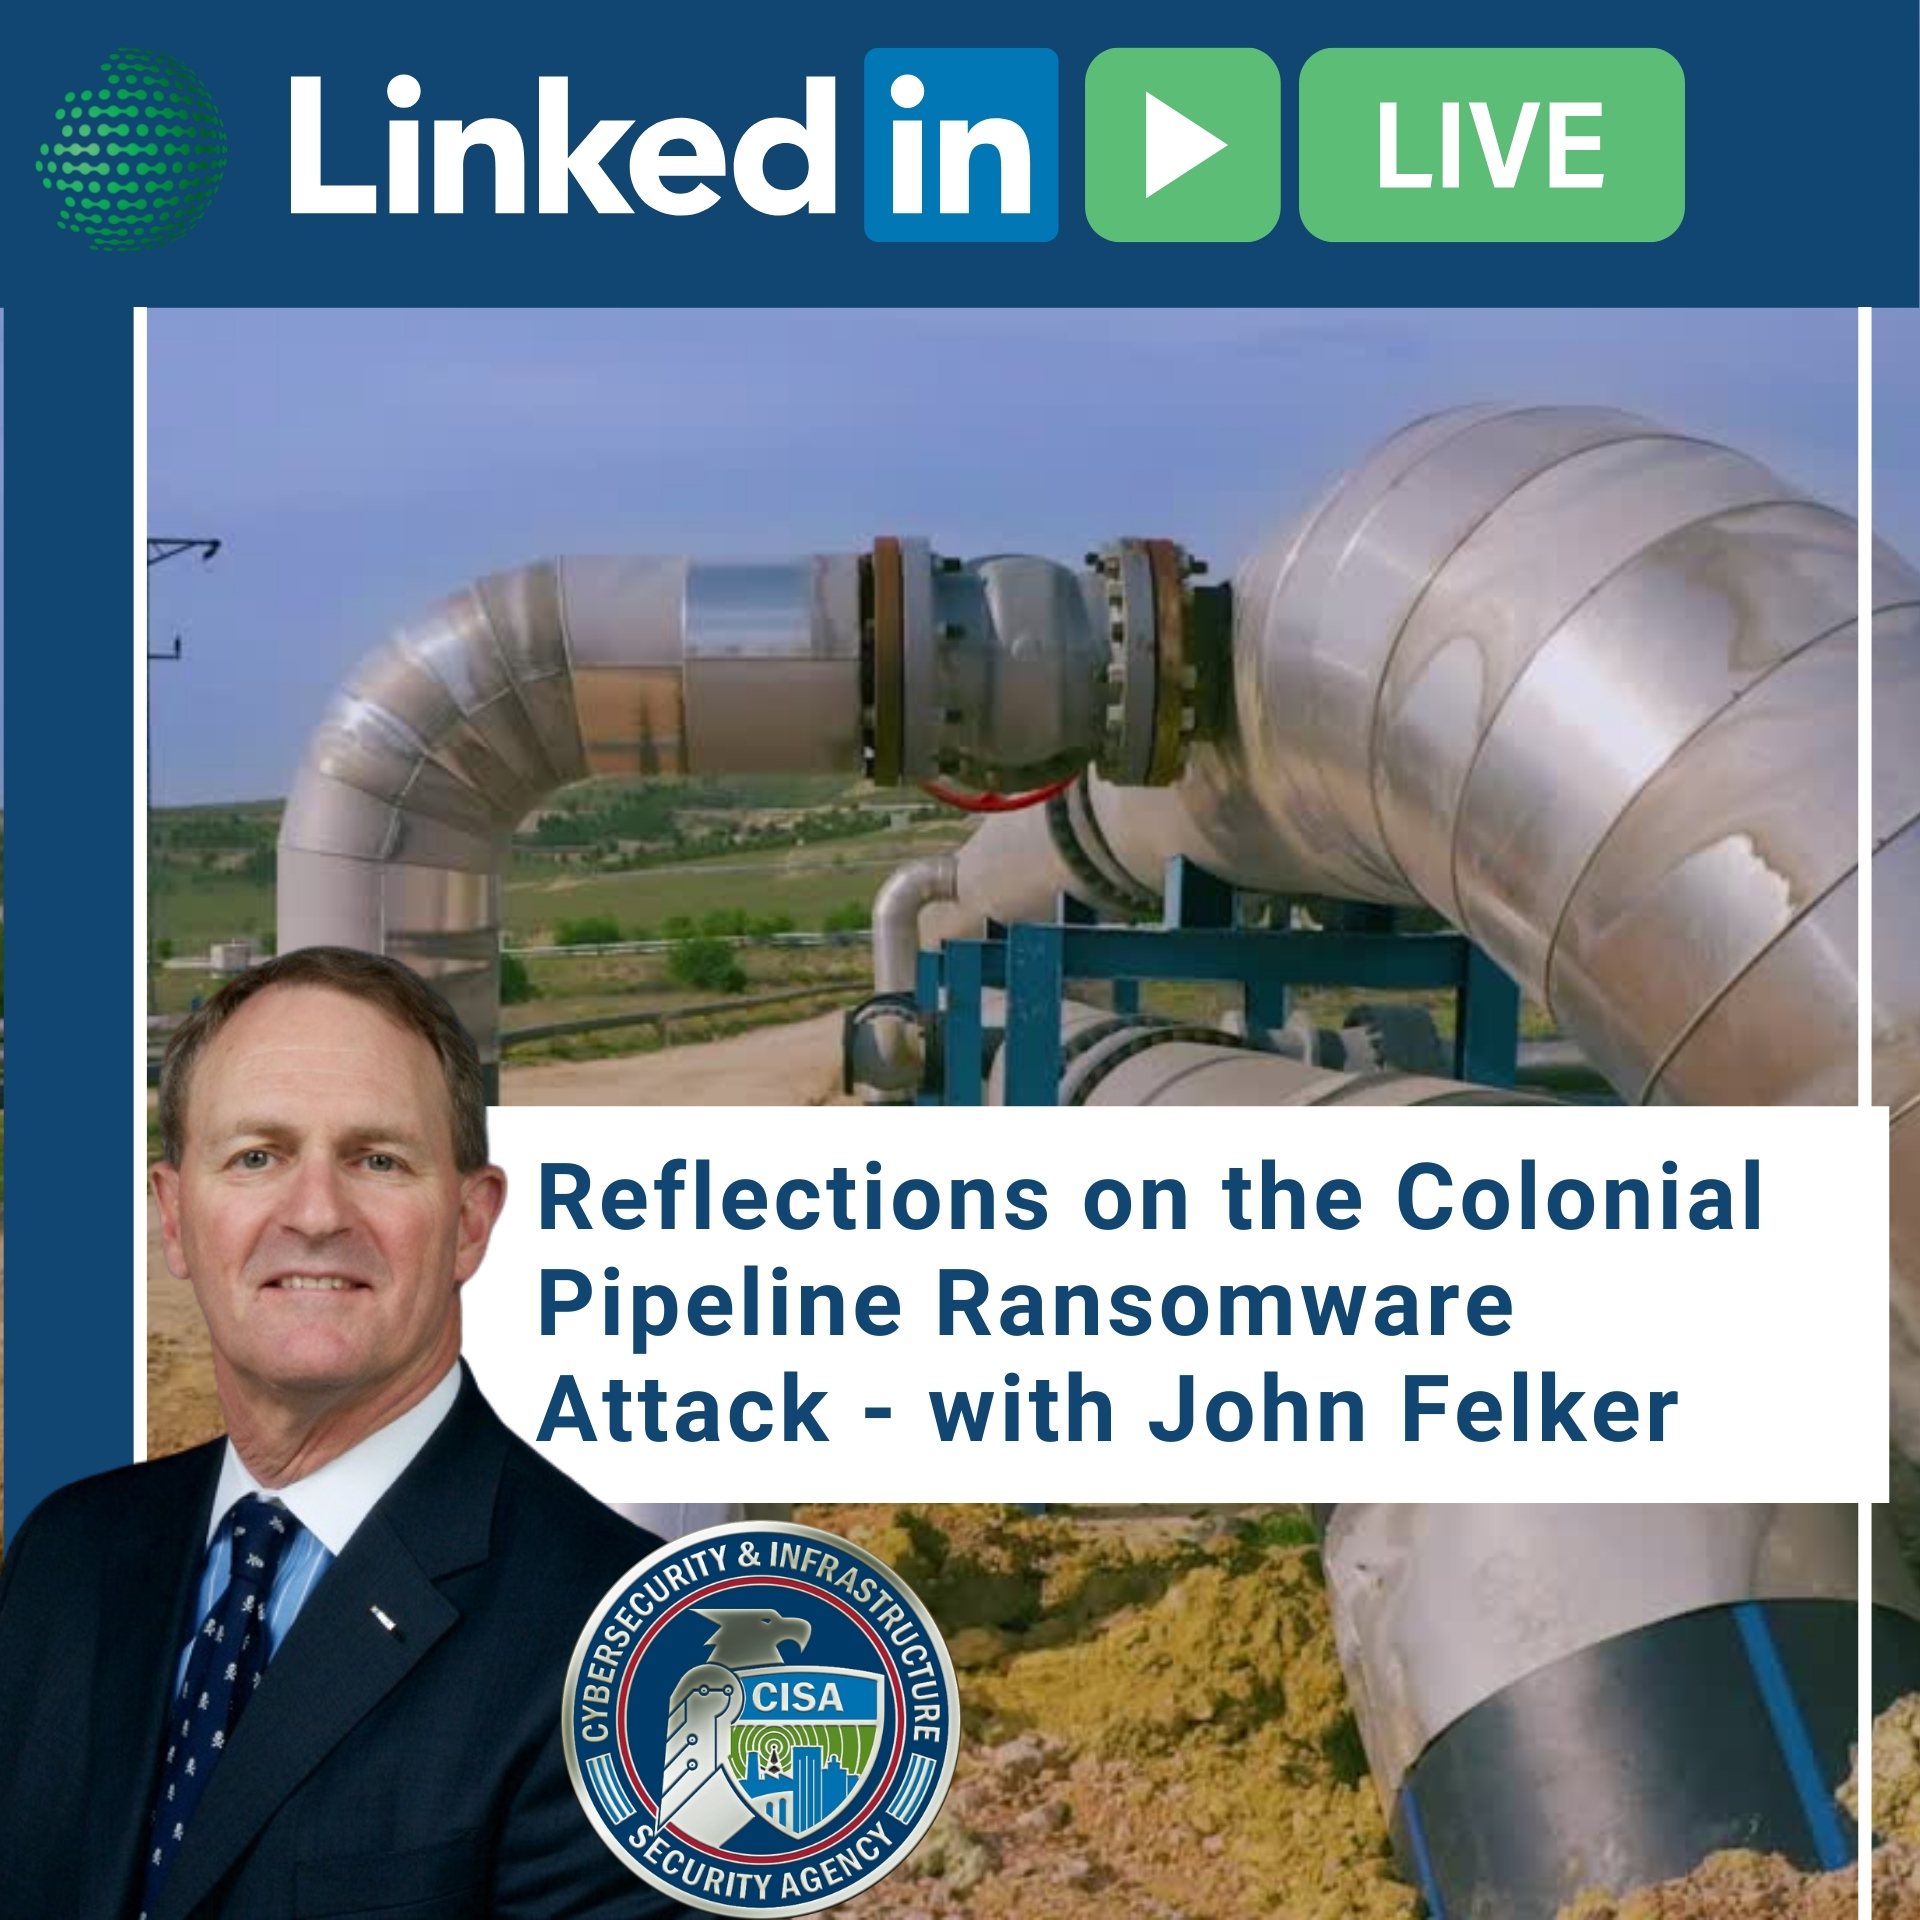 Copy of Reflections on the Colonial Pipeline Ransomware Attack - with John Felker